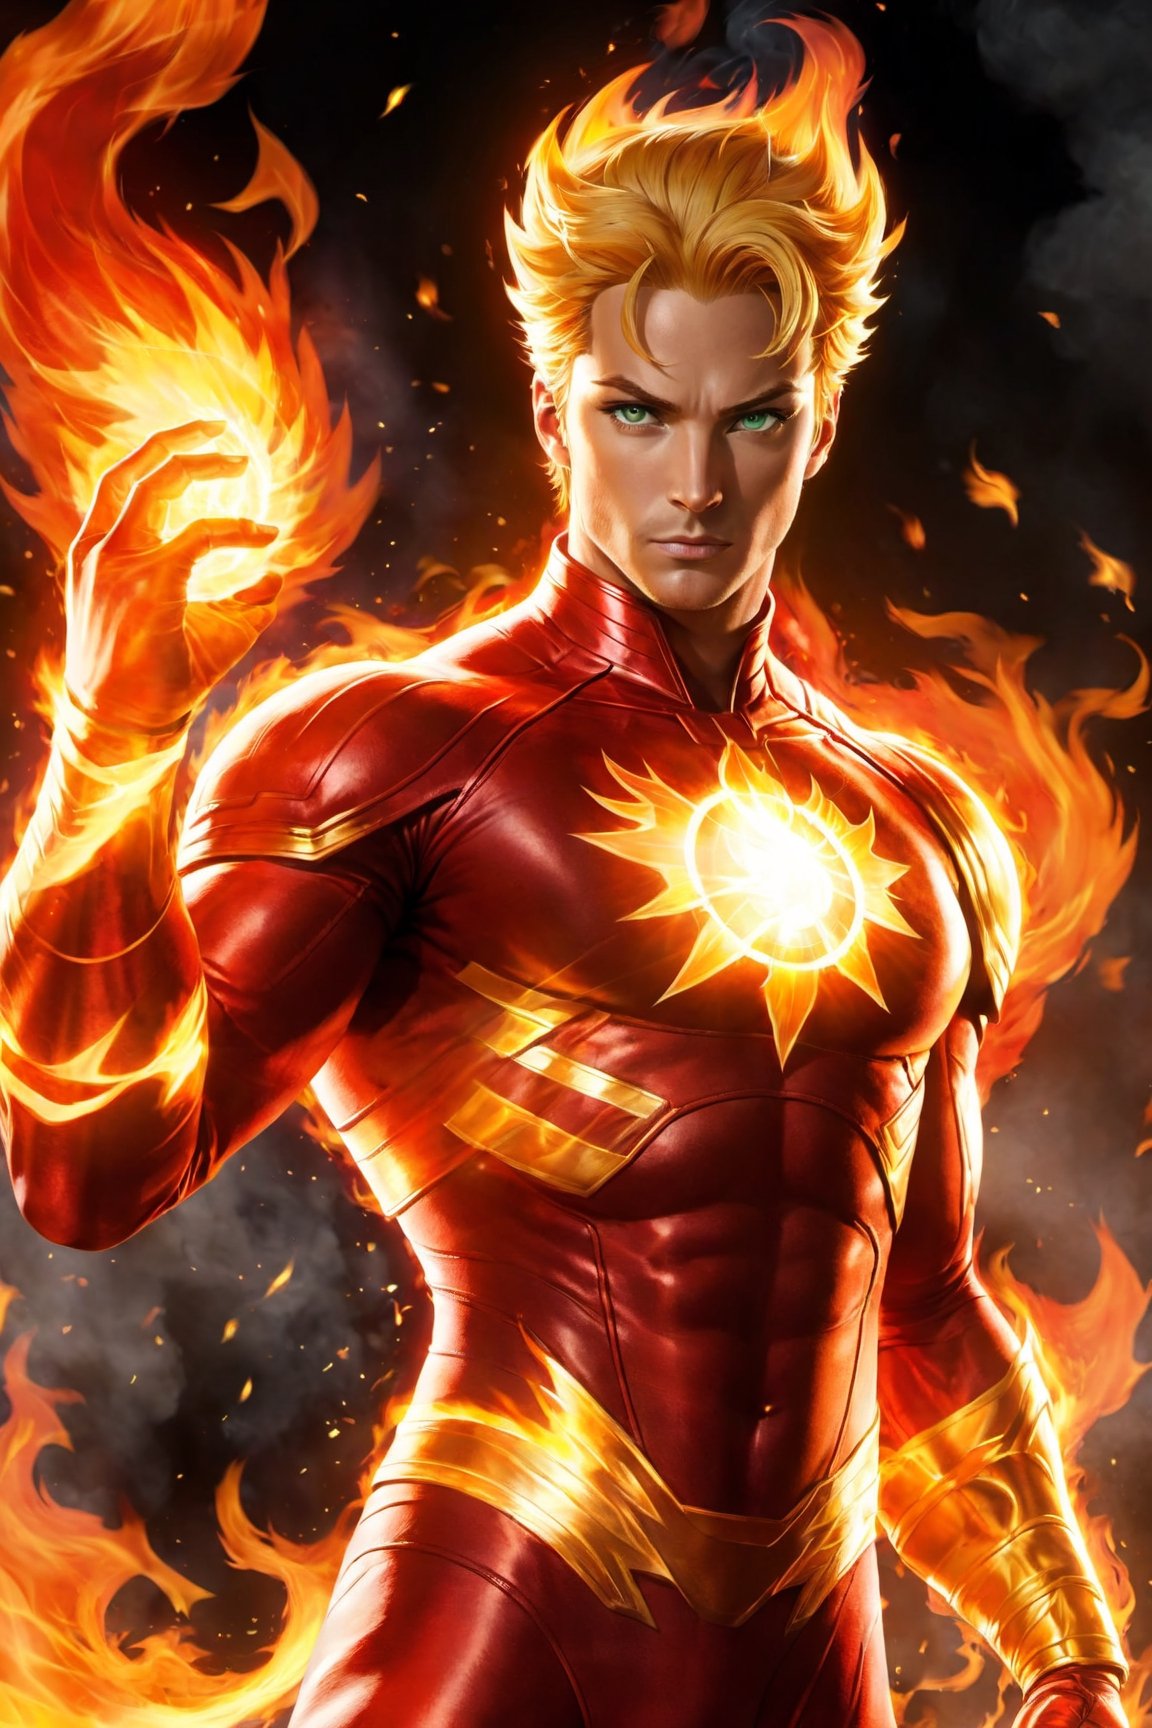 anime:1.9, cartoon:1.9, Imagine a dynamic scene featuring of iconic DC Comics character, enchantress mixed lady_human torch, heroin, superhero, fire deity, muscular, athleticism, combustion, energy, smoke, ashes. Firehair. (fire Eyes:1.6). (athletic:1.6). (incandescent fireball in his hands:1.6). ((concentration of fire in her upright right hand, she is prepared to attack)). ((fire lit in the palms of his hands)). Visualize him engulfed in flames, sexy pose, very big breast, swinging, radiating with fiery intensity. (fire-colored suit with red details:1.6). ((His body burns with great intensity, emitting light and heat, burning in flames)). Craft a prompt for a super detailed, 16k Ultra HDR image capturing the essence of Human Torch's blazing presence – perfect face, flames, and dynamic pose. (brightness, vibe, vitality, energy, halo, halo, aura:1.5), (arms wrapped in flames, fire). flashes of fire surround his body. Choose a background that complements his character, creating a cinematic masterpiece with high realism and top-notch image quality, fire element:1.5,3d_toon_xl:0.2, xl-shanbailing-1003fire-000010:0.6, demonictech:0.1, MagmaTech:0.1human on fire:1.2, feh:0.4, firepunch:1.3, zeldaALBW:0.1, makioze:0.4, fire_lit_DC:0.5, DonMF1re:0.5, FireAI:0.6, Cursed energy:0.5, XieS:0.3, r1ge - AnimeRage:1.3, :JuggerCineXL2:0.6,add_detail:0.6,3d toon style,Movie Still,DonMCyb3rN3cr0XL-000009:0.3